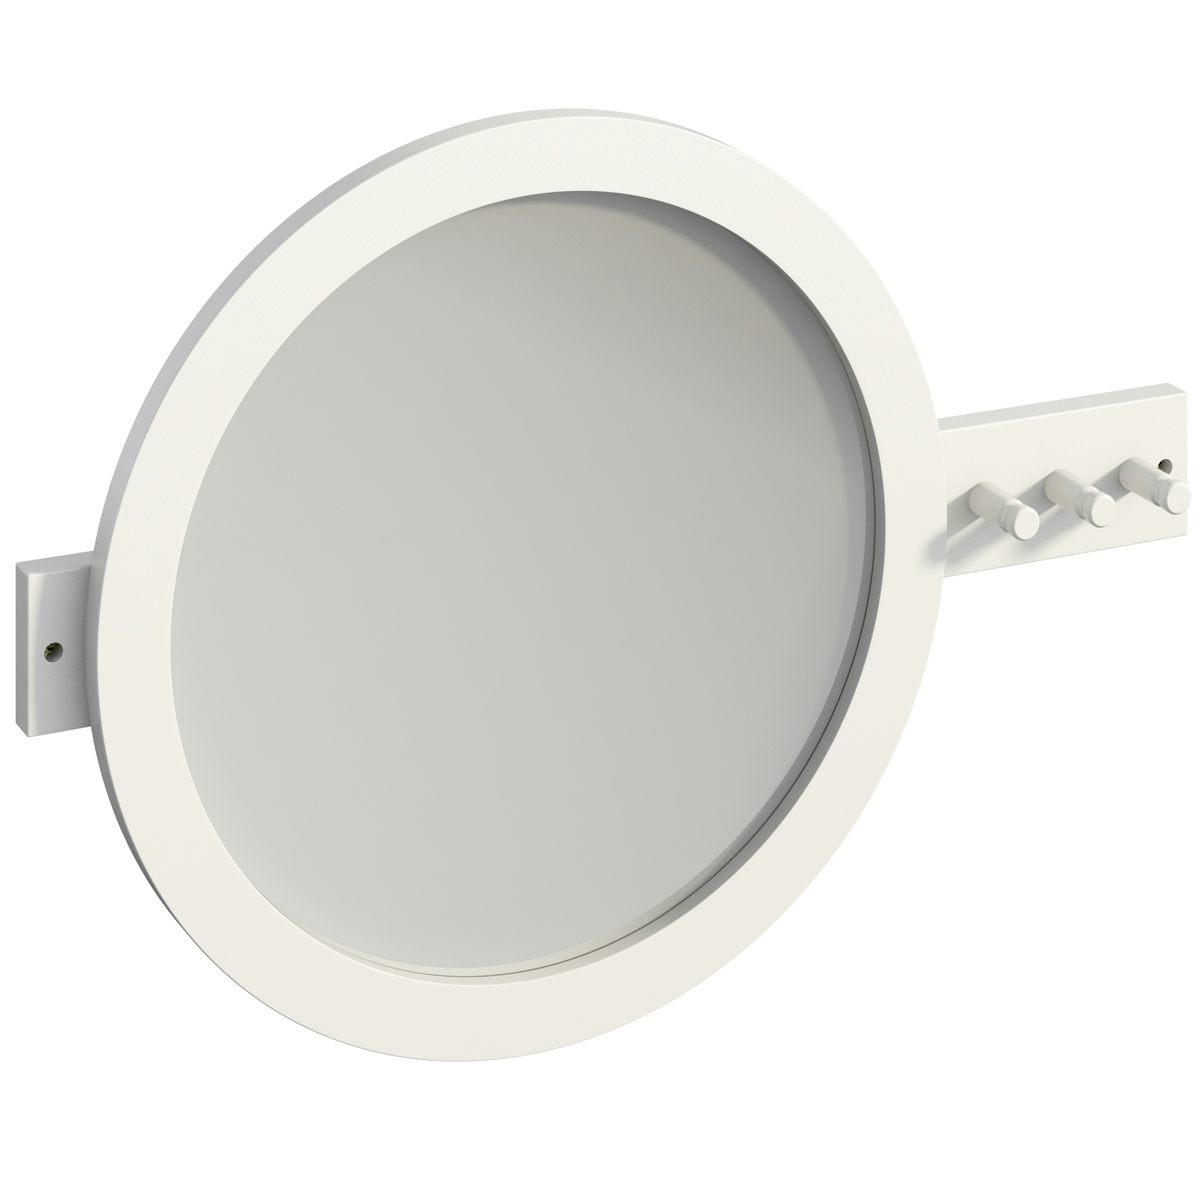 Mode South Bank white round bathroom mirror with robe hooks 500 x 700mm